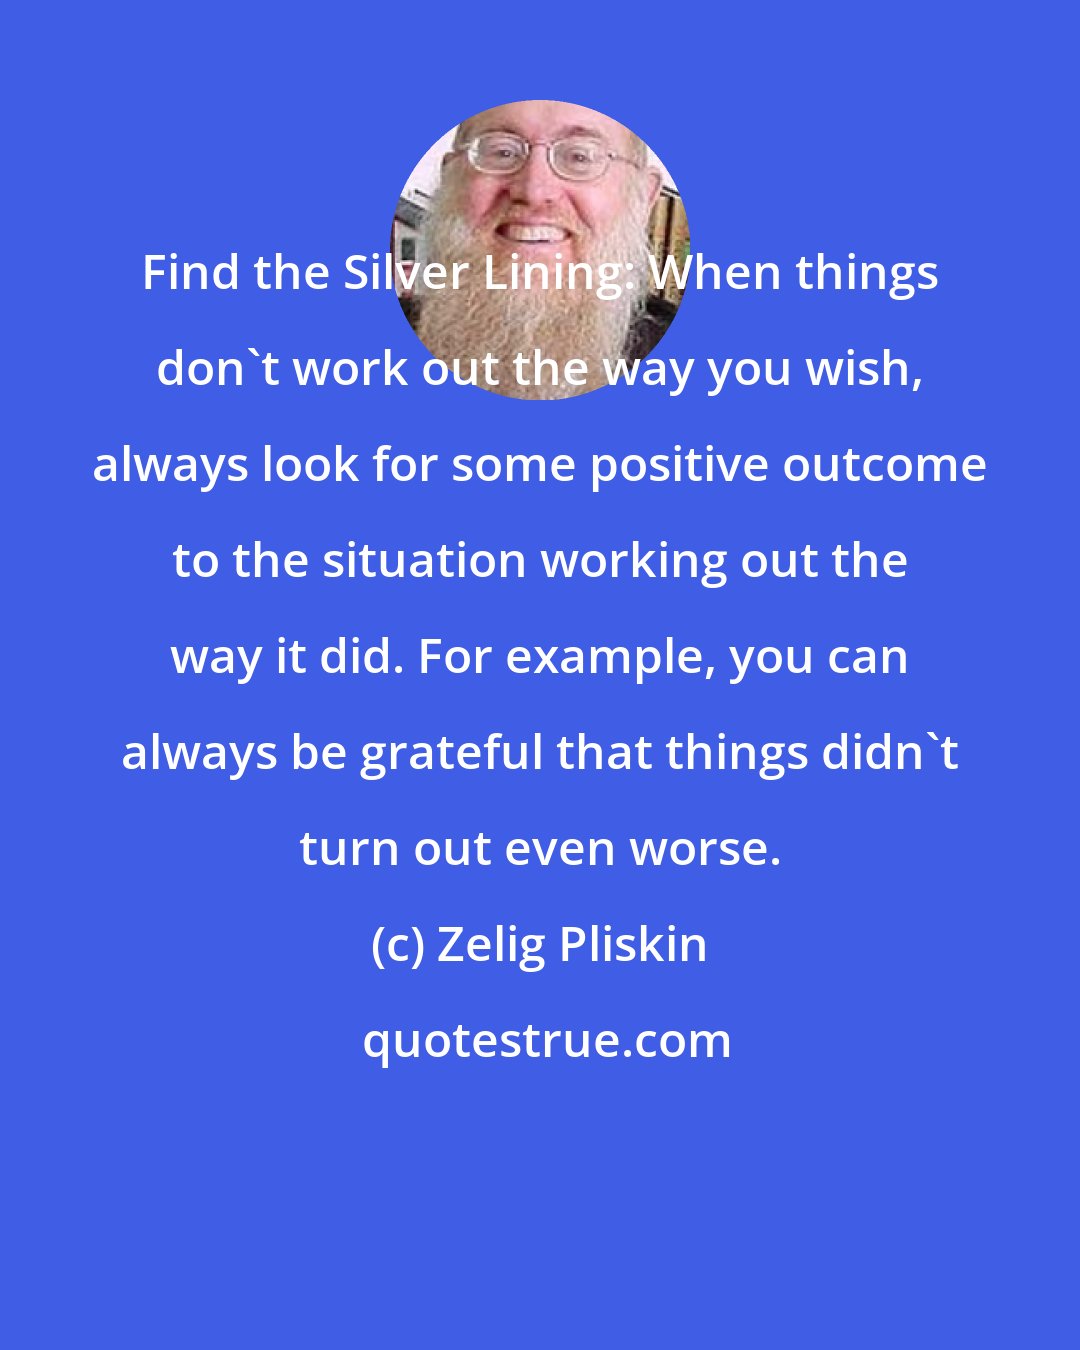 Zelig Pliskin: Find the Silver Lining: When things don't work out the way you wish, always look for some positive outcome to the situation working out the way it did. For example, you can always be grateful that things didn't turn out even worse.